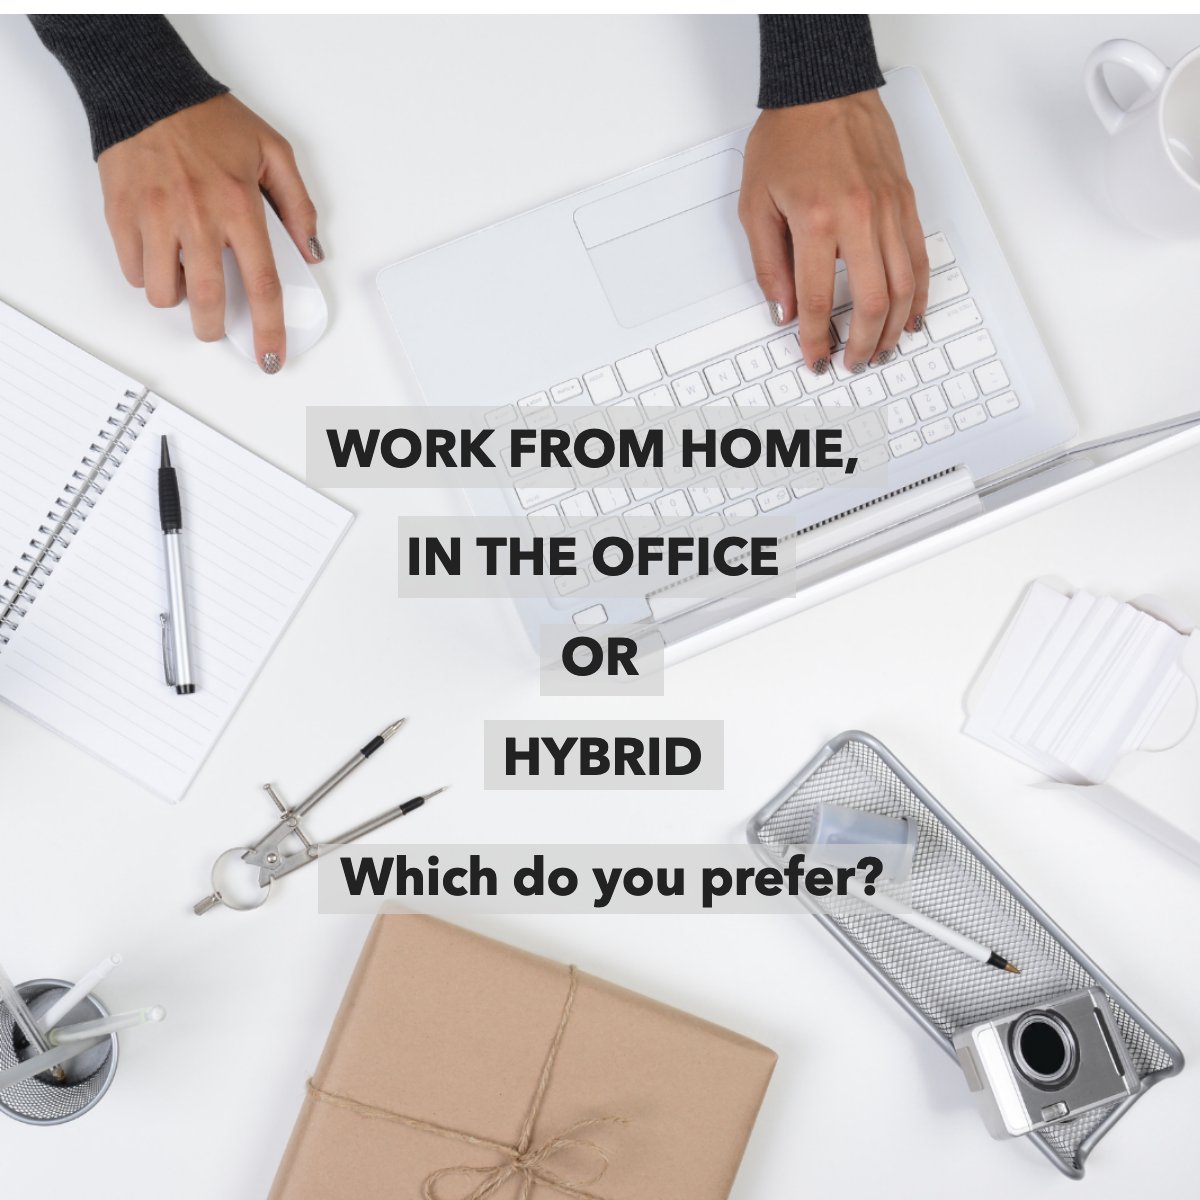 Do you have a dedicated working space? 💻
 
Tell us in the comments! 💭 

#question     #workspace     #worklife     #homeoffice     #hybridwork
#barbarabarker #barrettrealestate #barbarabarkerteam #realestate #scottsdale #chandler #queencreek #gilbert #homes